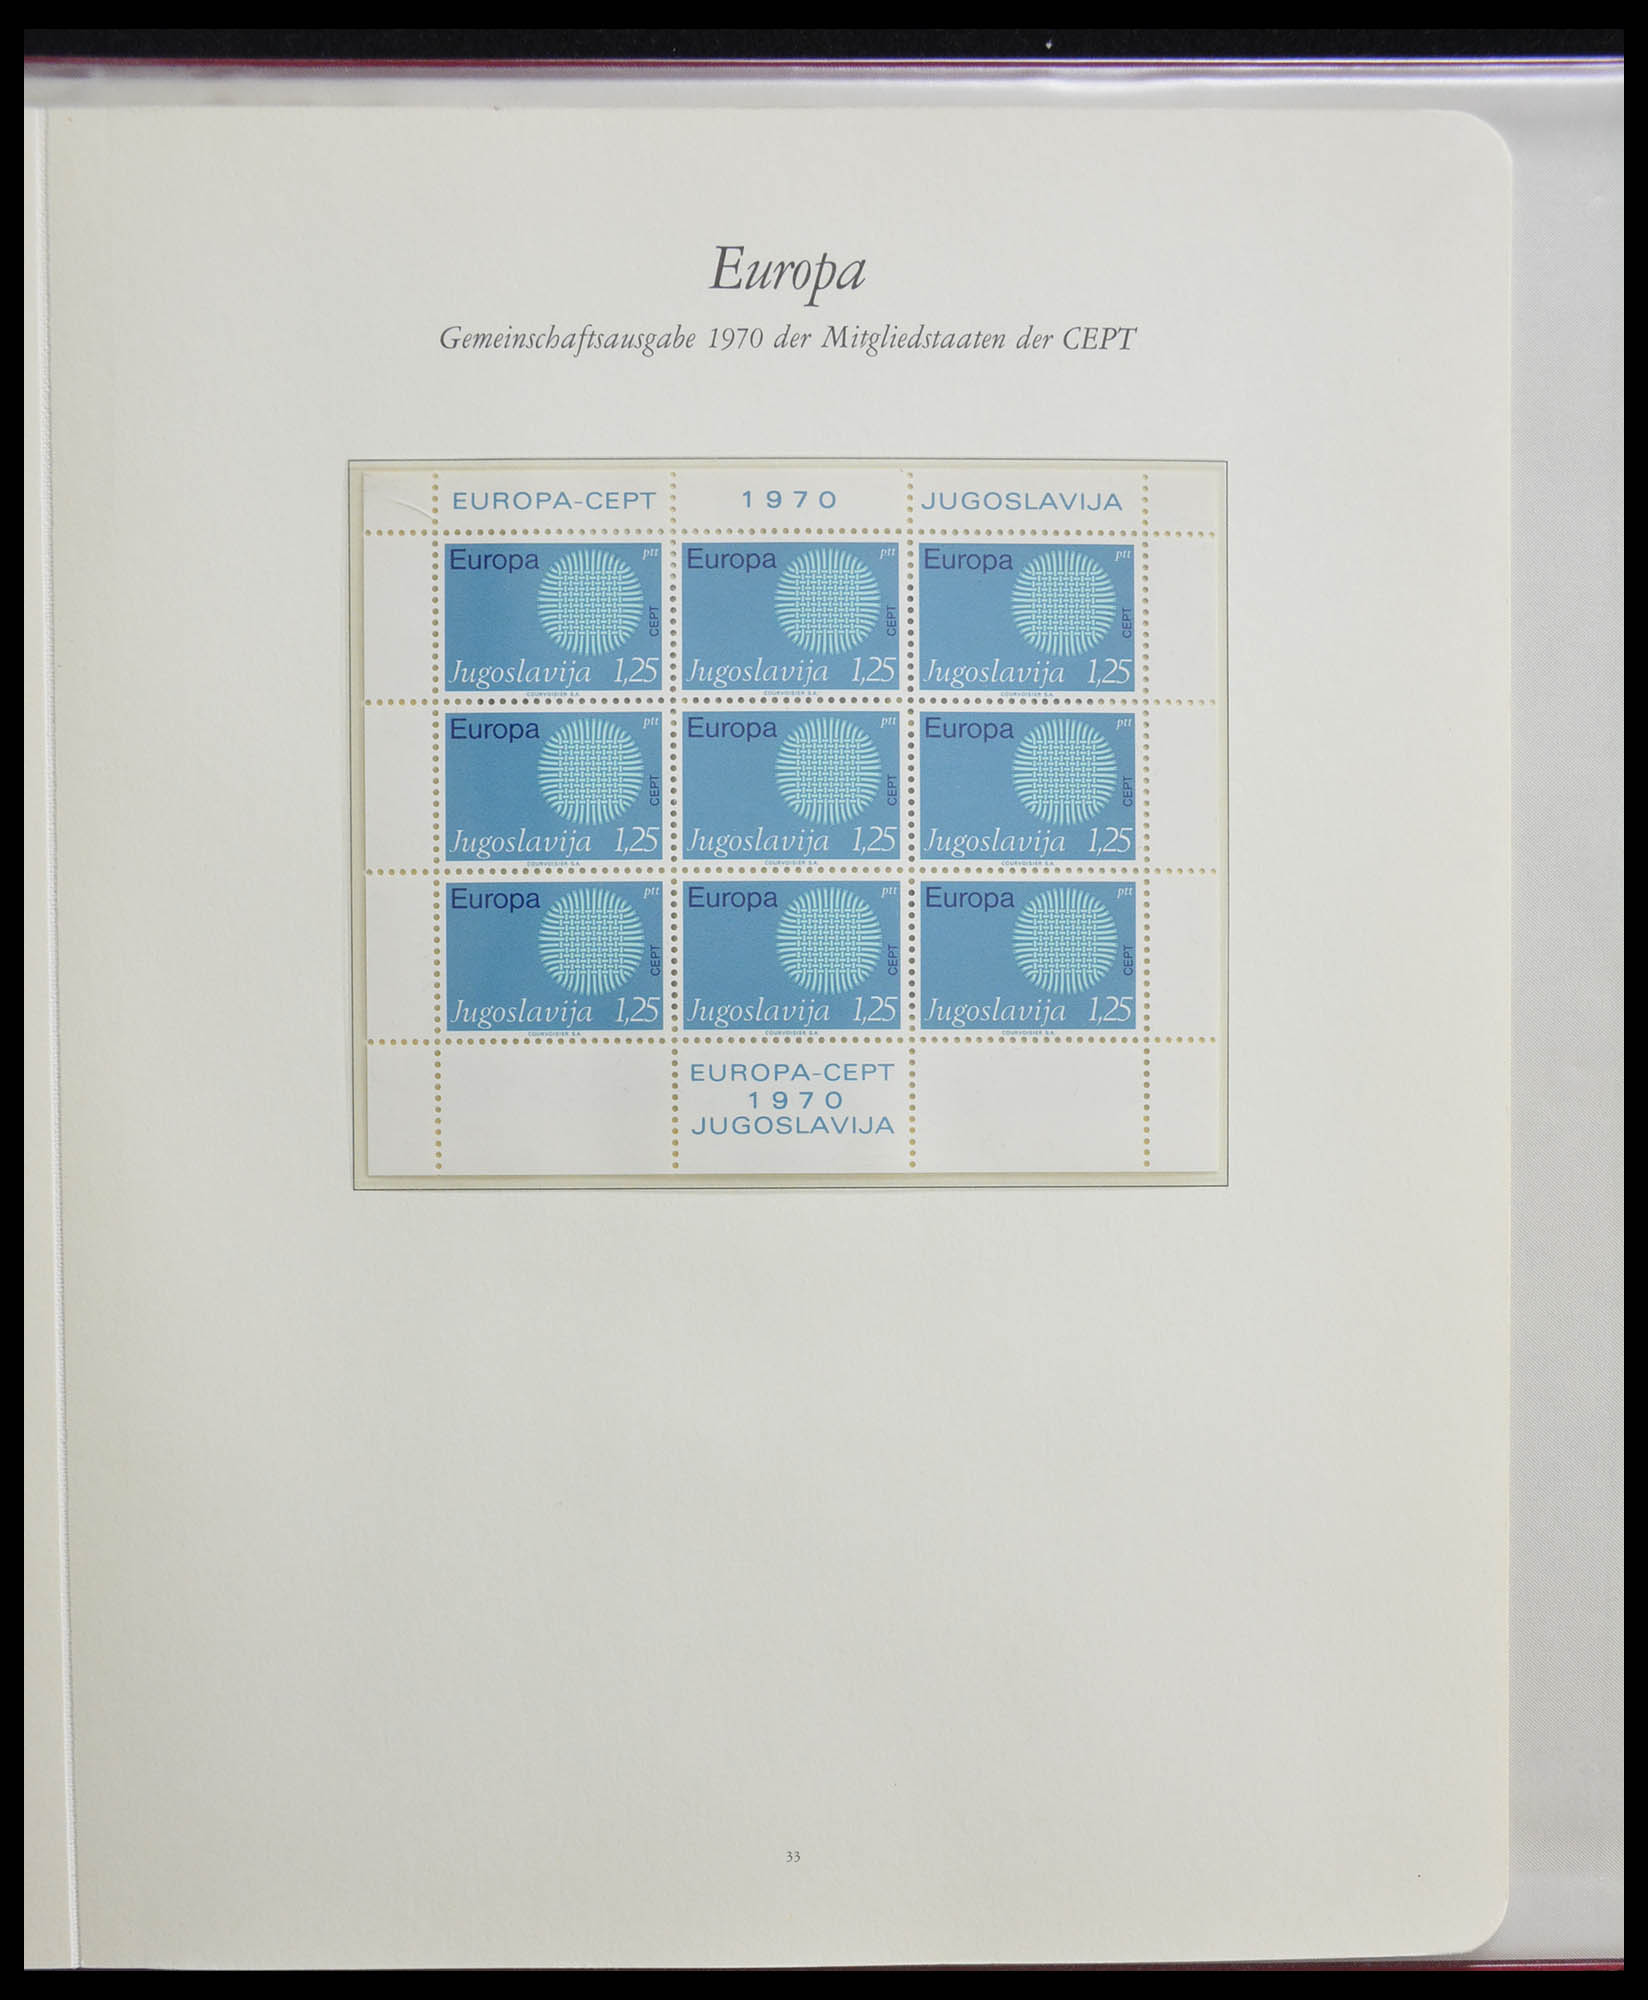 28356 0089 - 28356 Europa Cept ultra specialised collection 1942-1984.